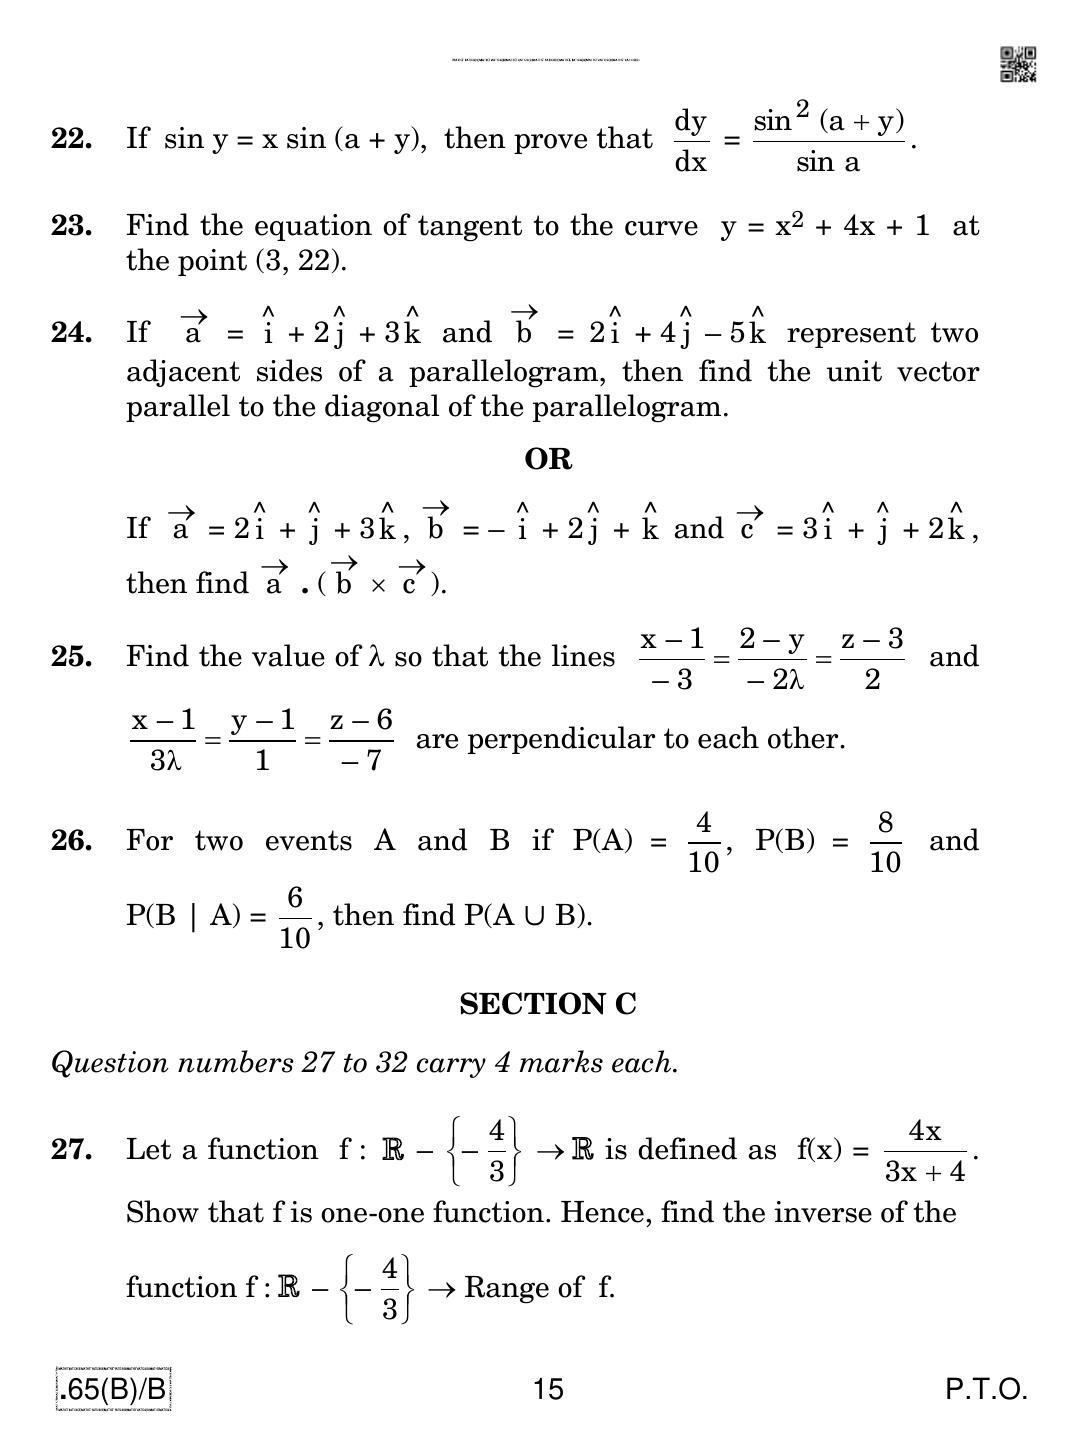 CBSE Class 12 65(B)-C - Maths For Blind Candidates 2020 Compartment Question Paper - Page 15